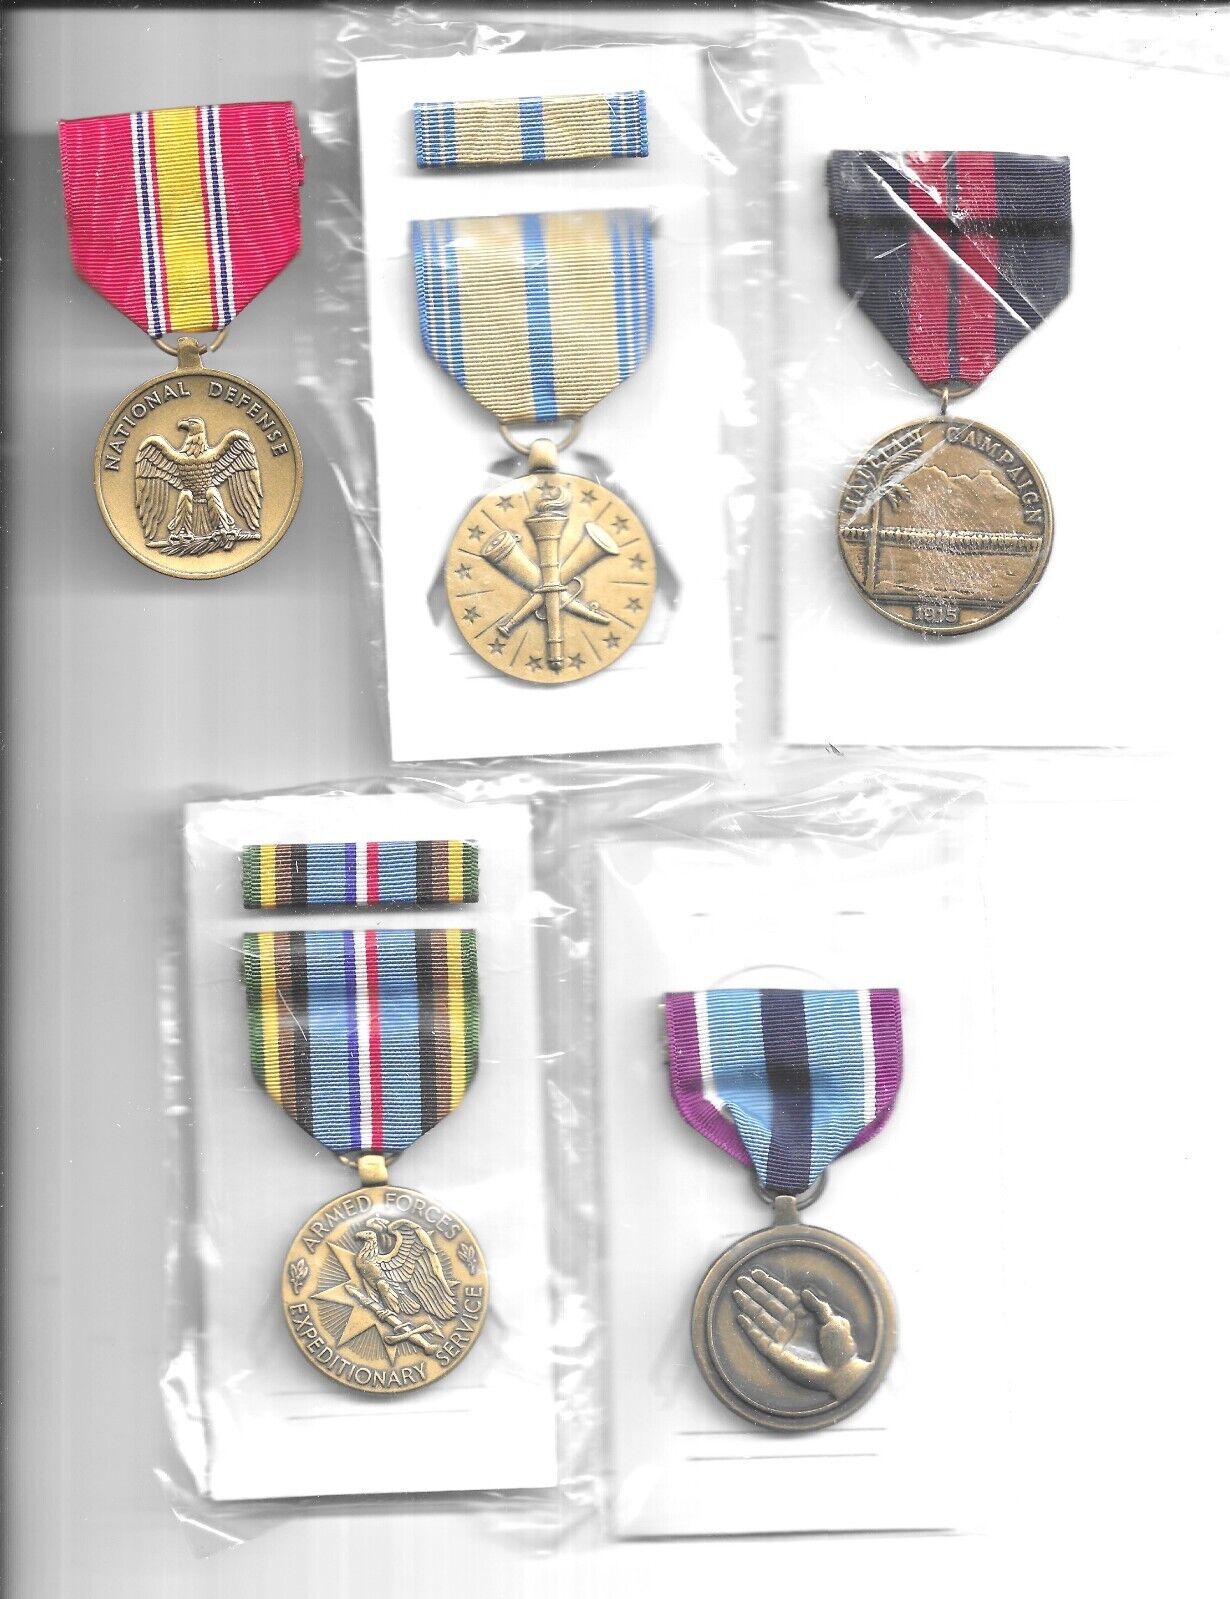 LOT OF 5 DIFFERENT U.S. MILITARY MEDALS(USM 1534)